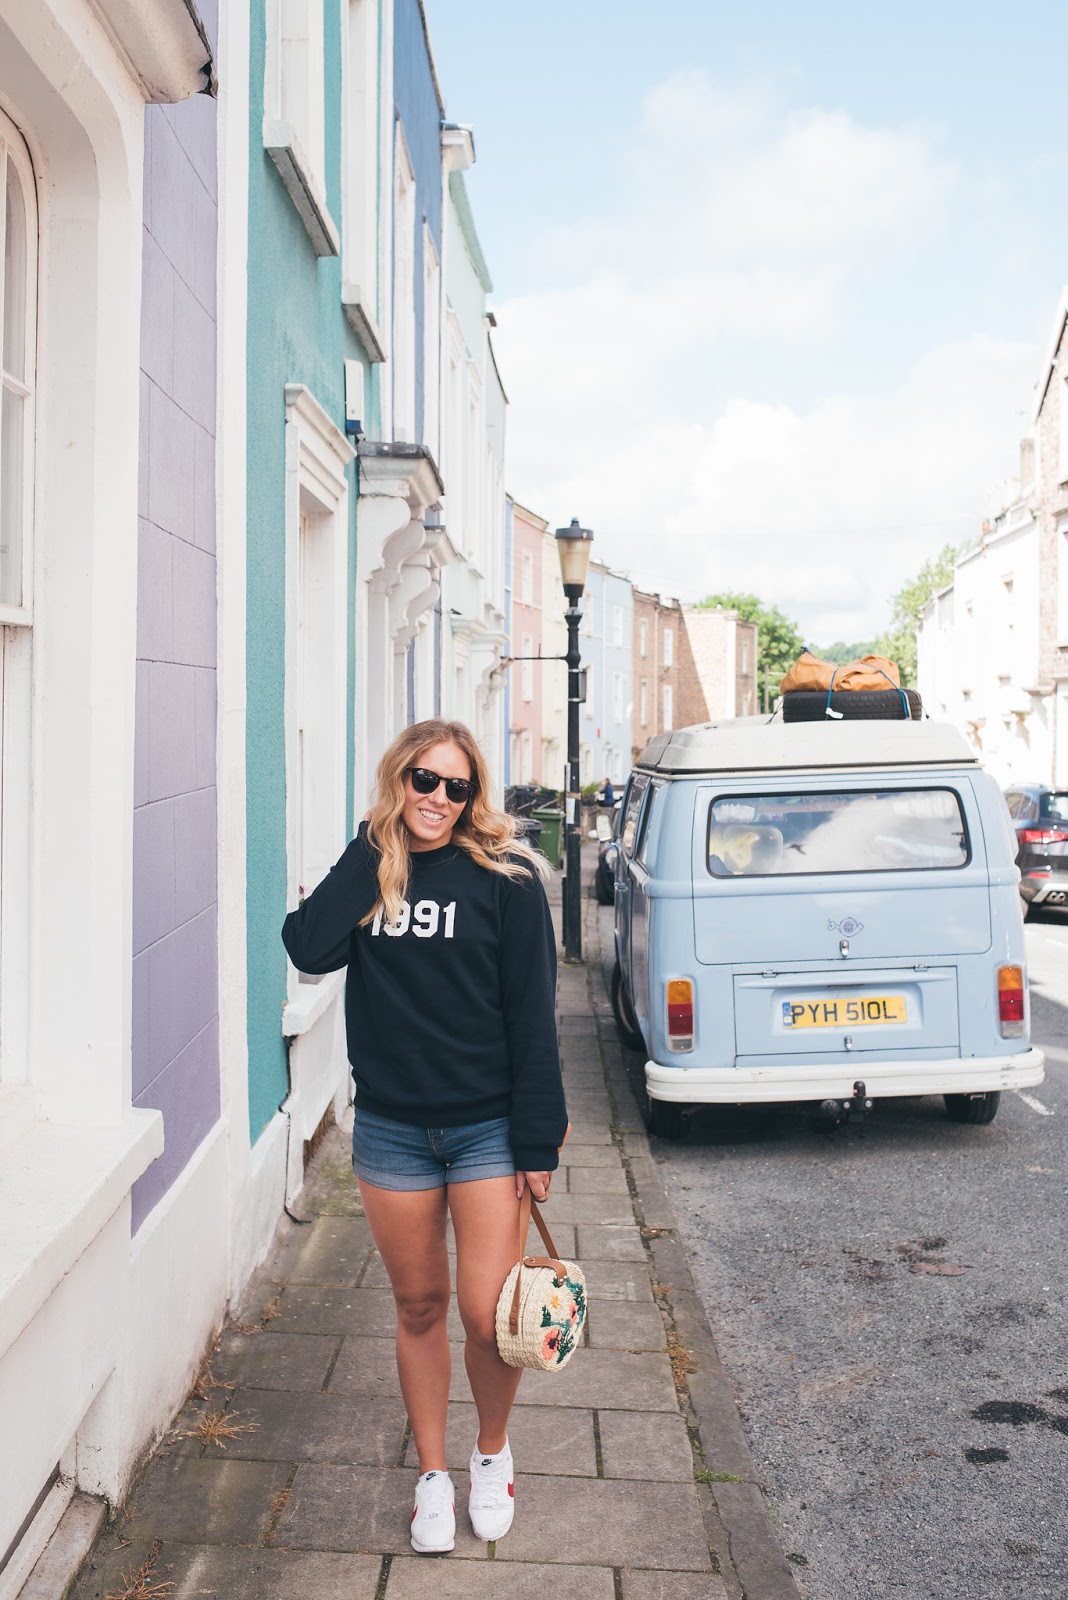 Rachel Emily in front of pastel coloured houses smiling with a pale blue VW Campervan